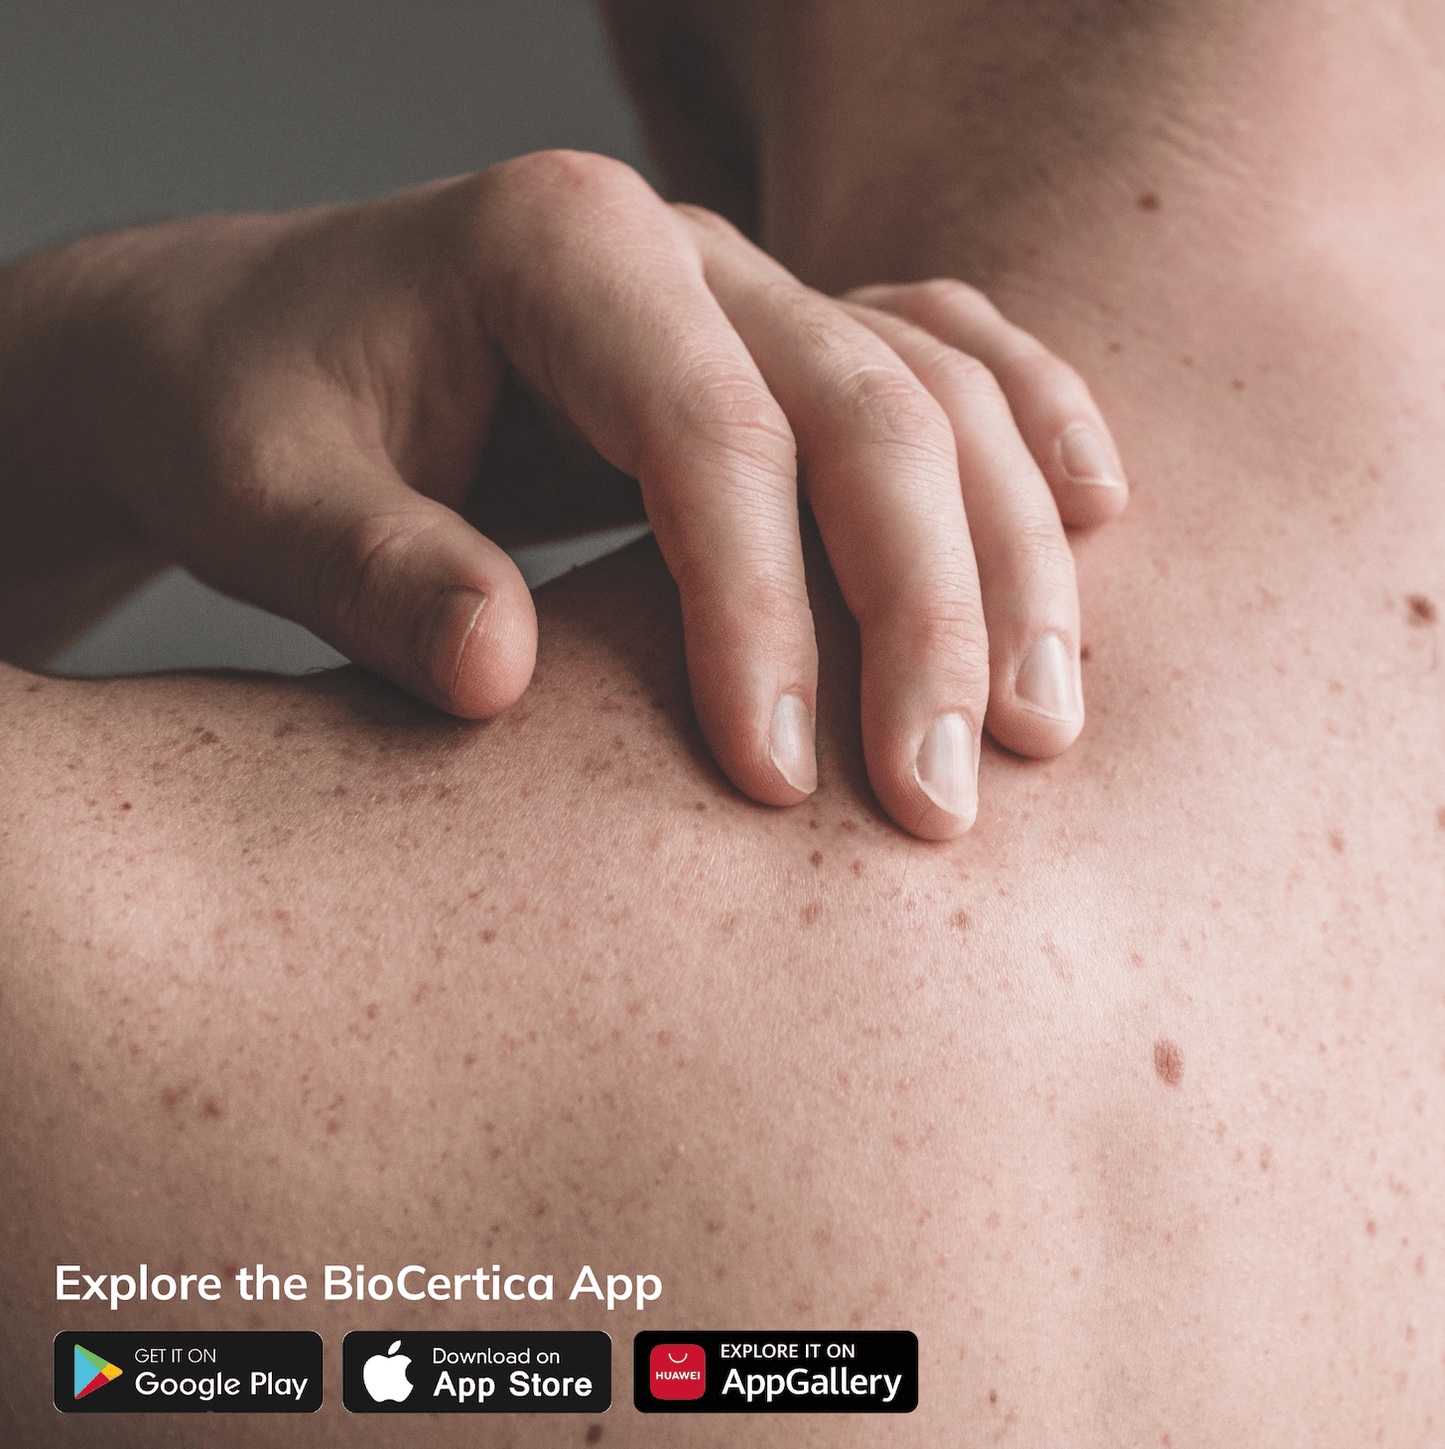 Explore Hair Loss, Traits, and Arthritis Risk in the BioCertica app.